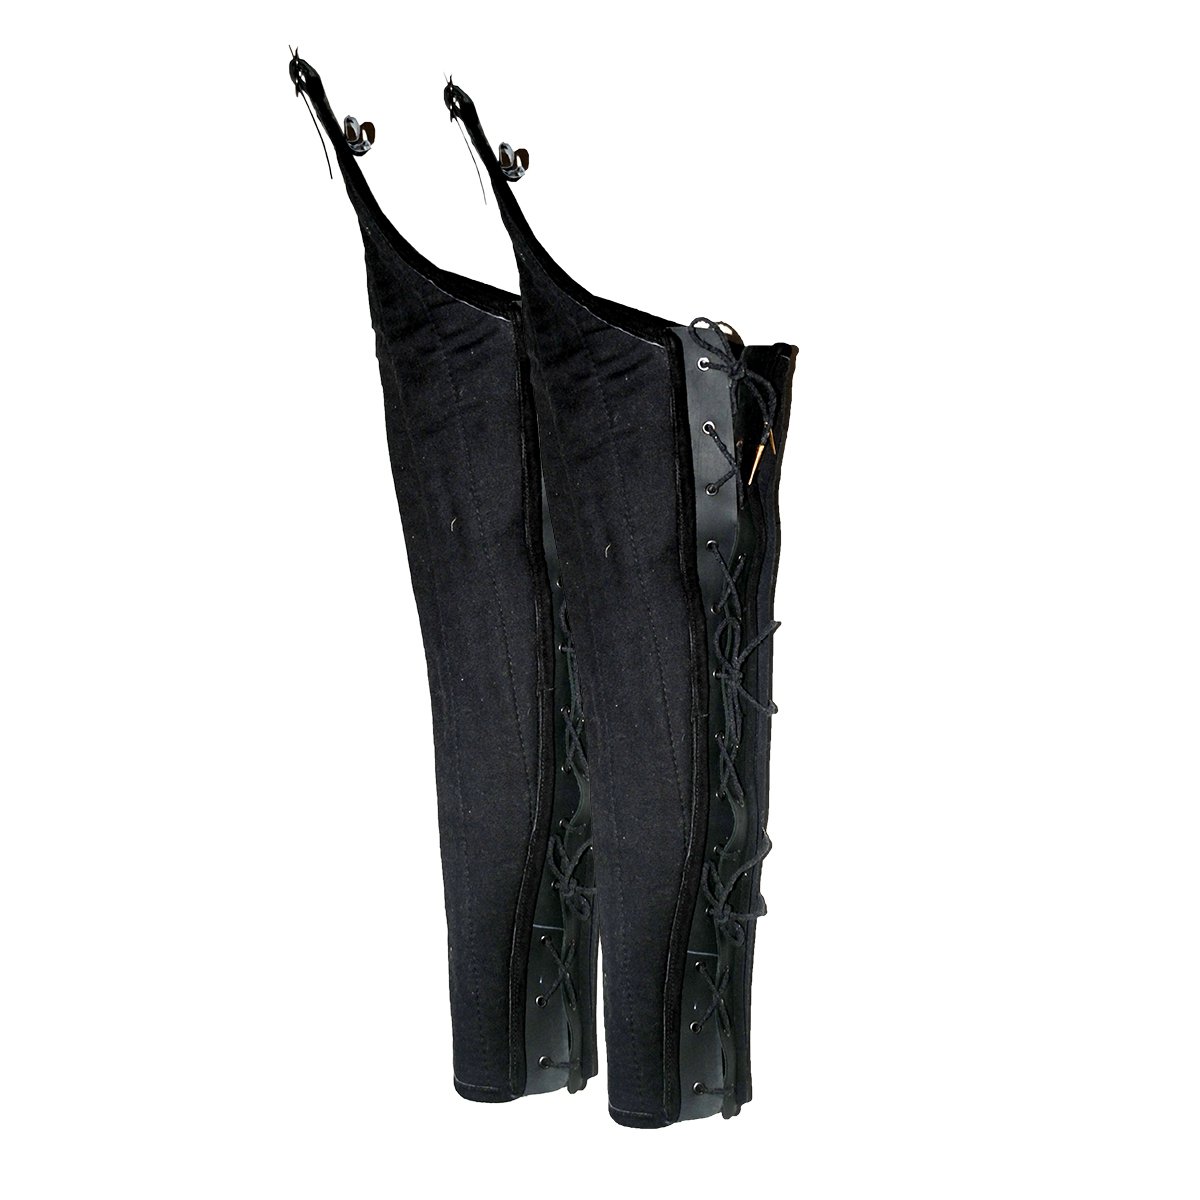 Crusader Padded Trousers - black, Size XL